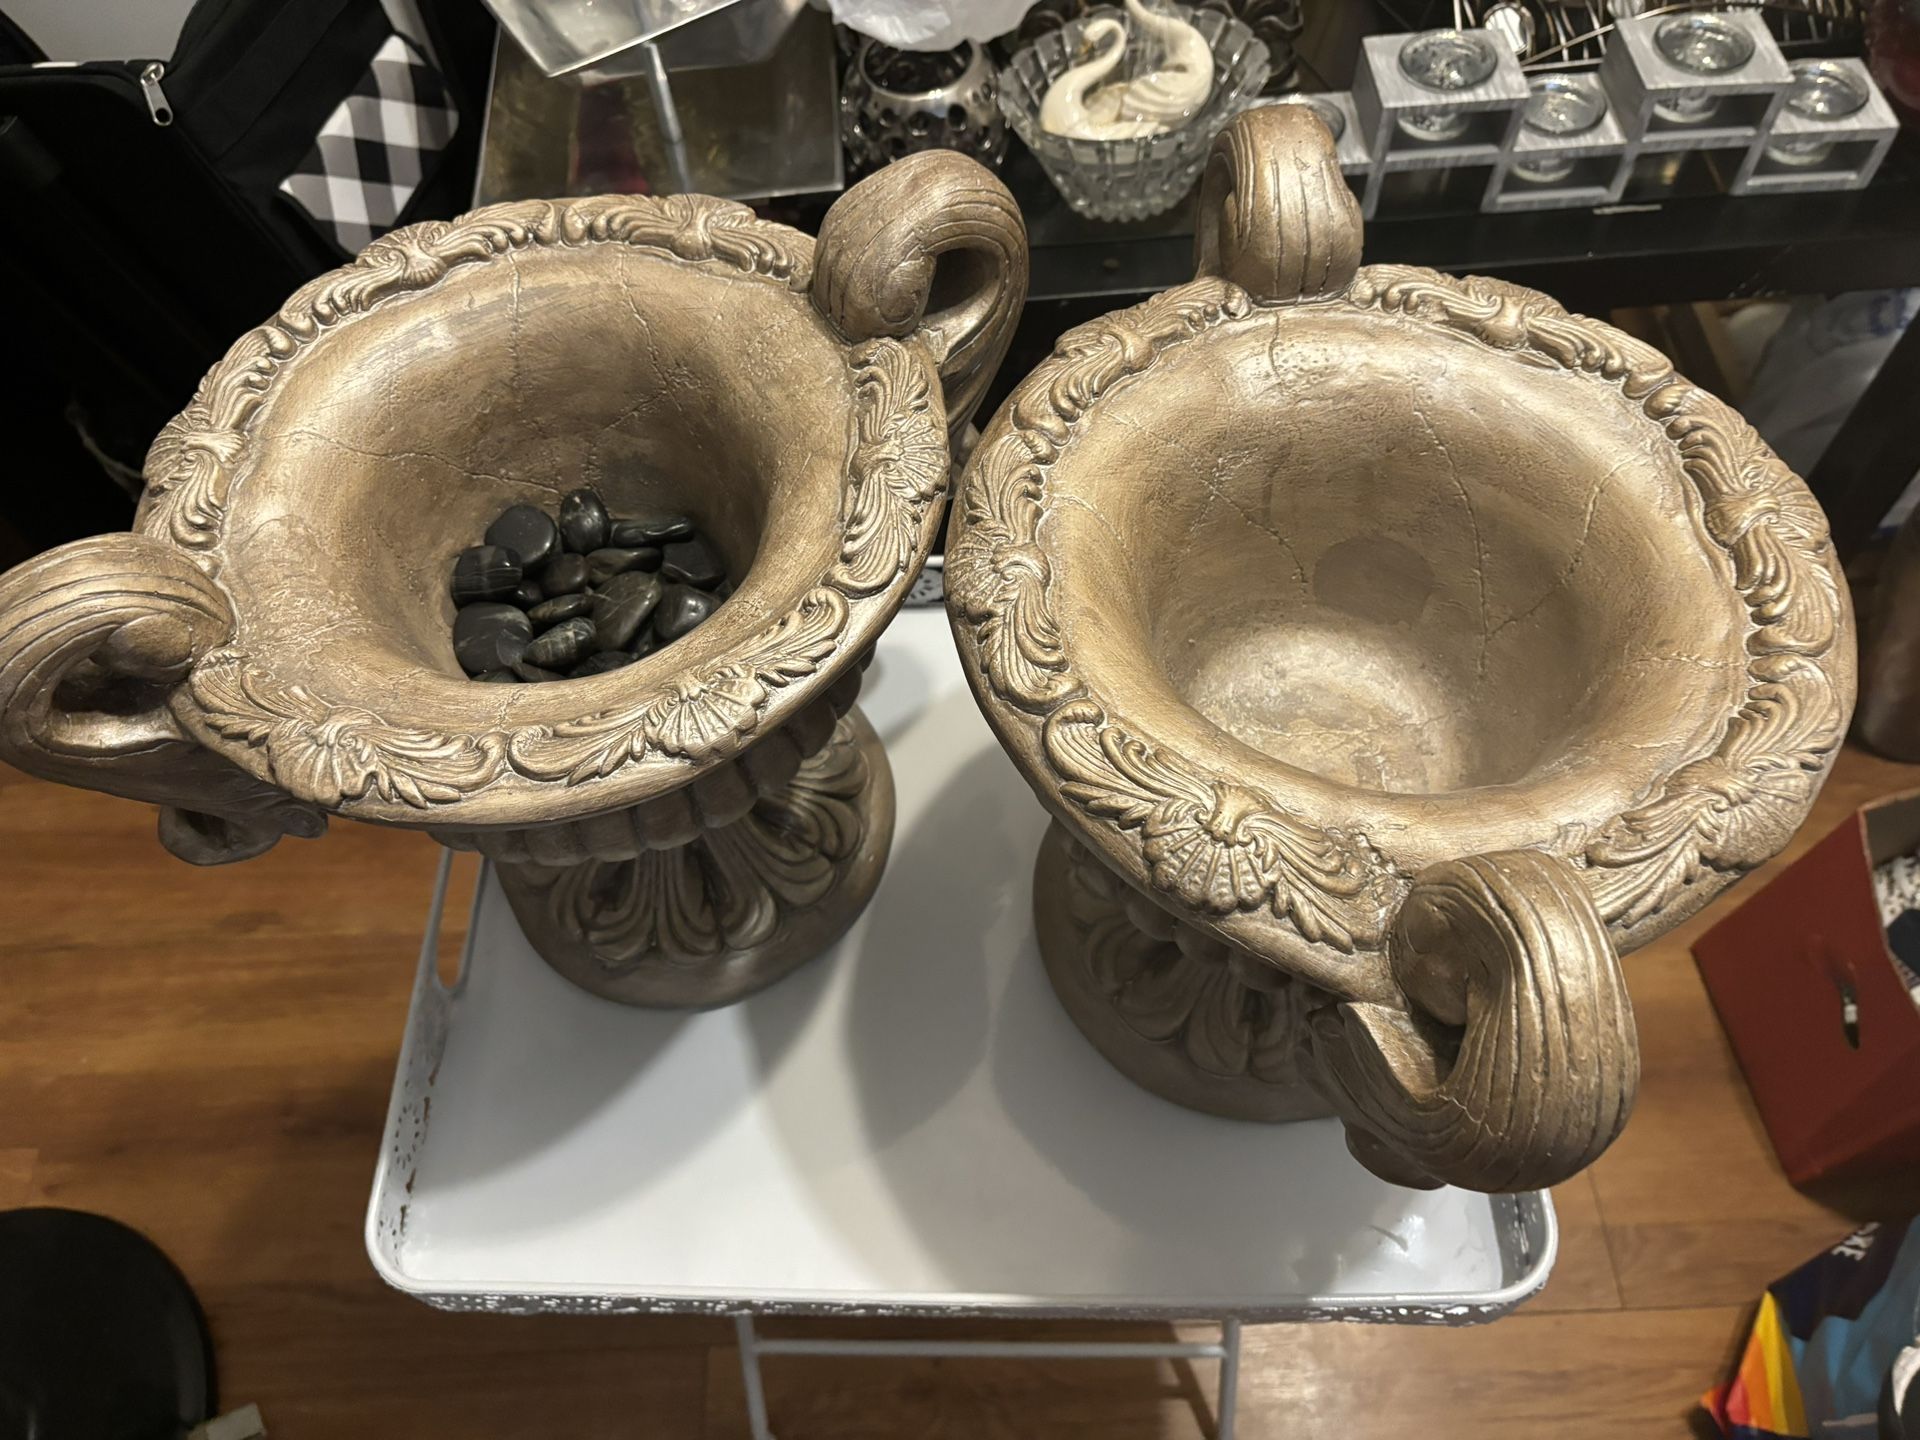 Plant Cement Holders 